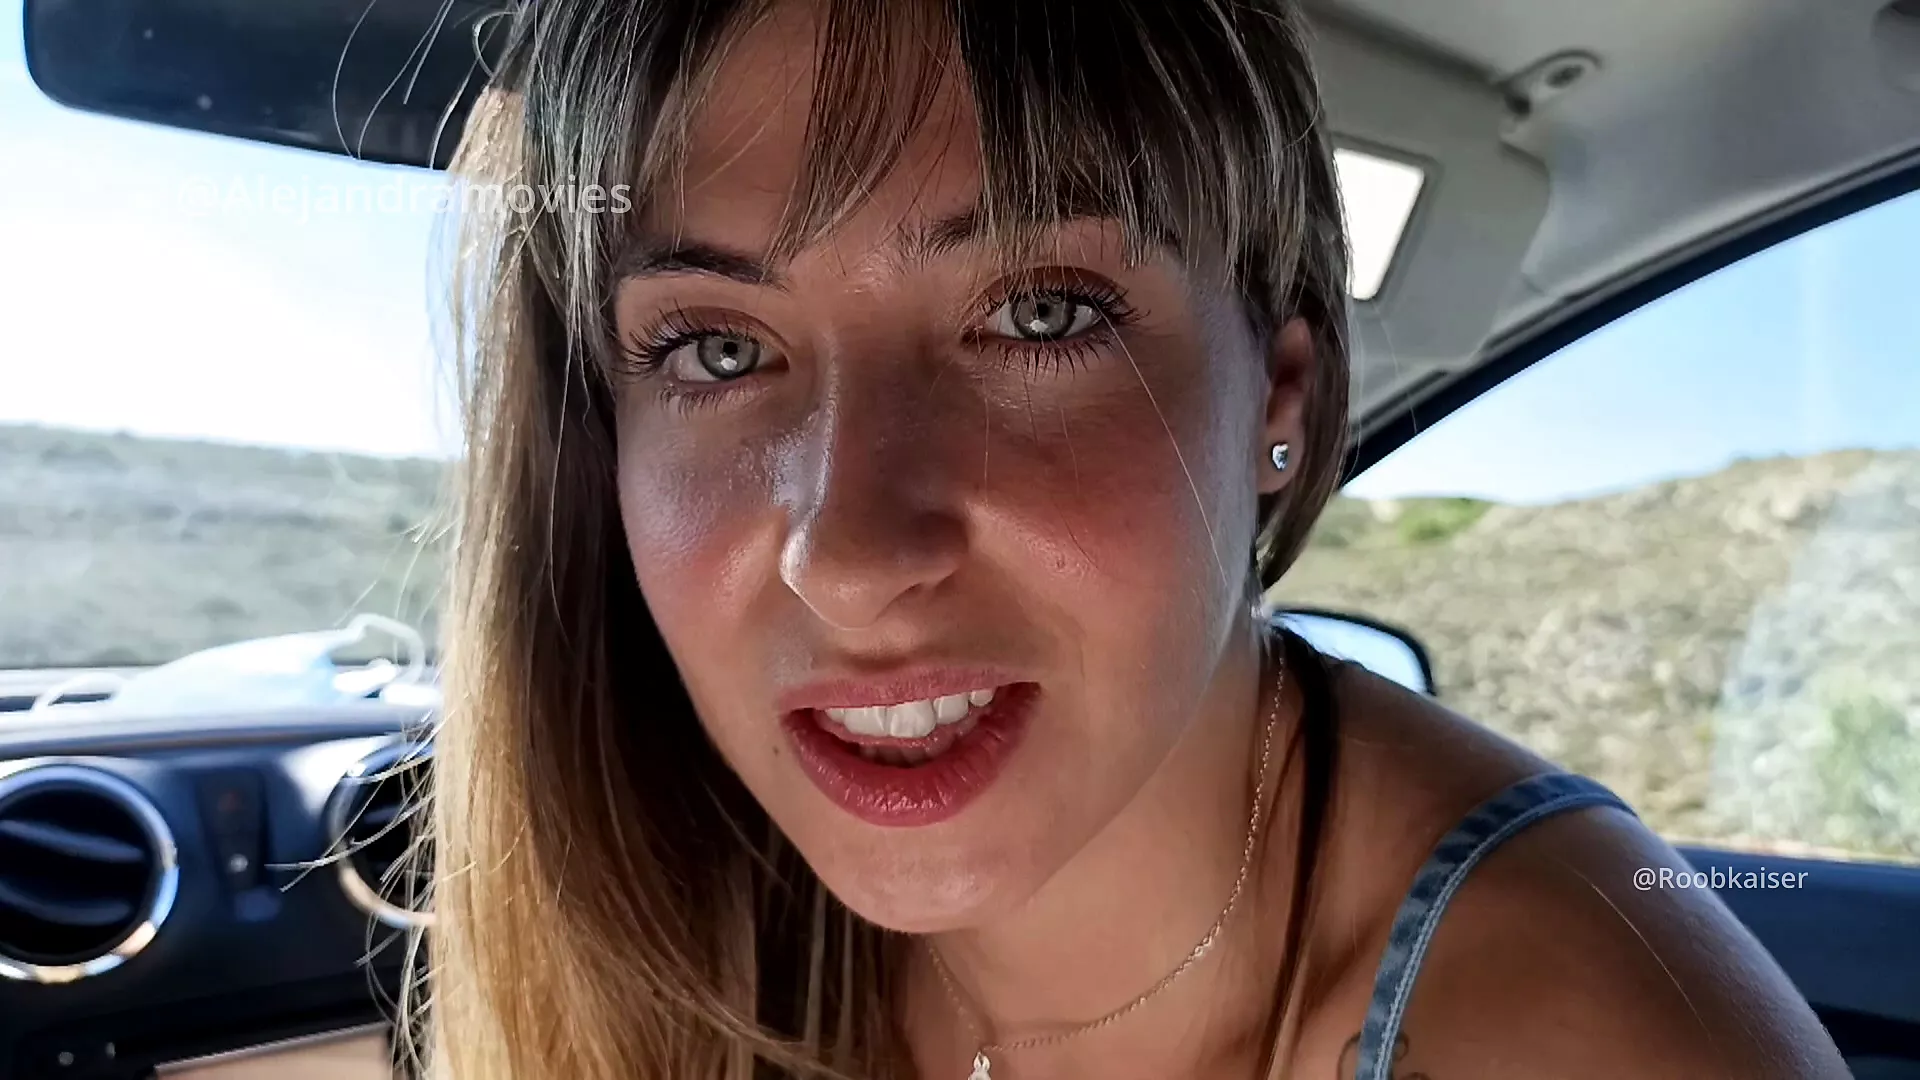 Oral sex with a stranger in the car, I suck his cock in the car in public picture